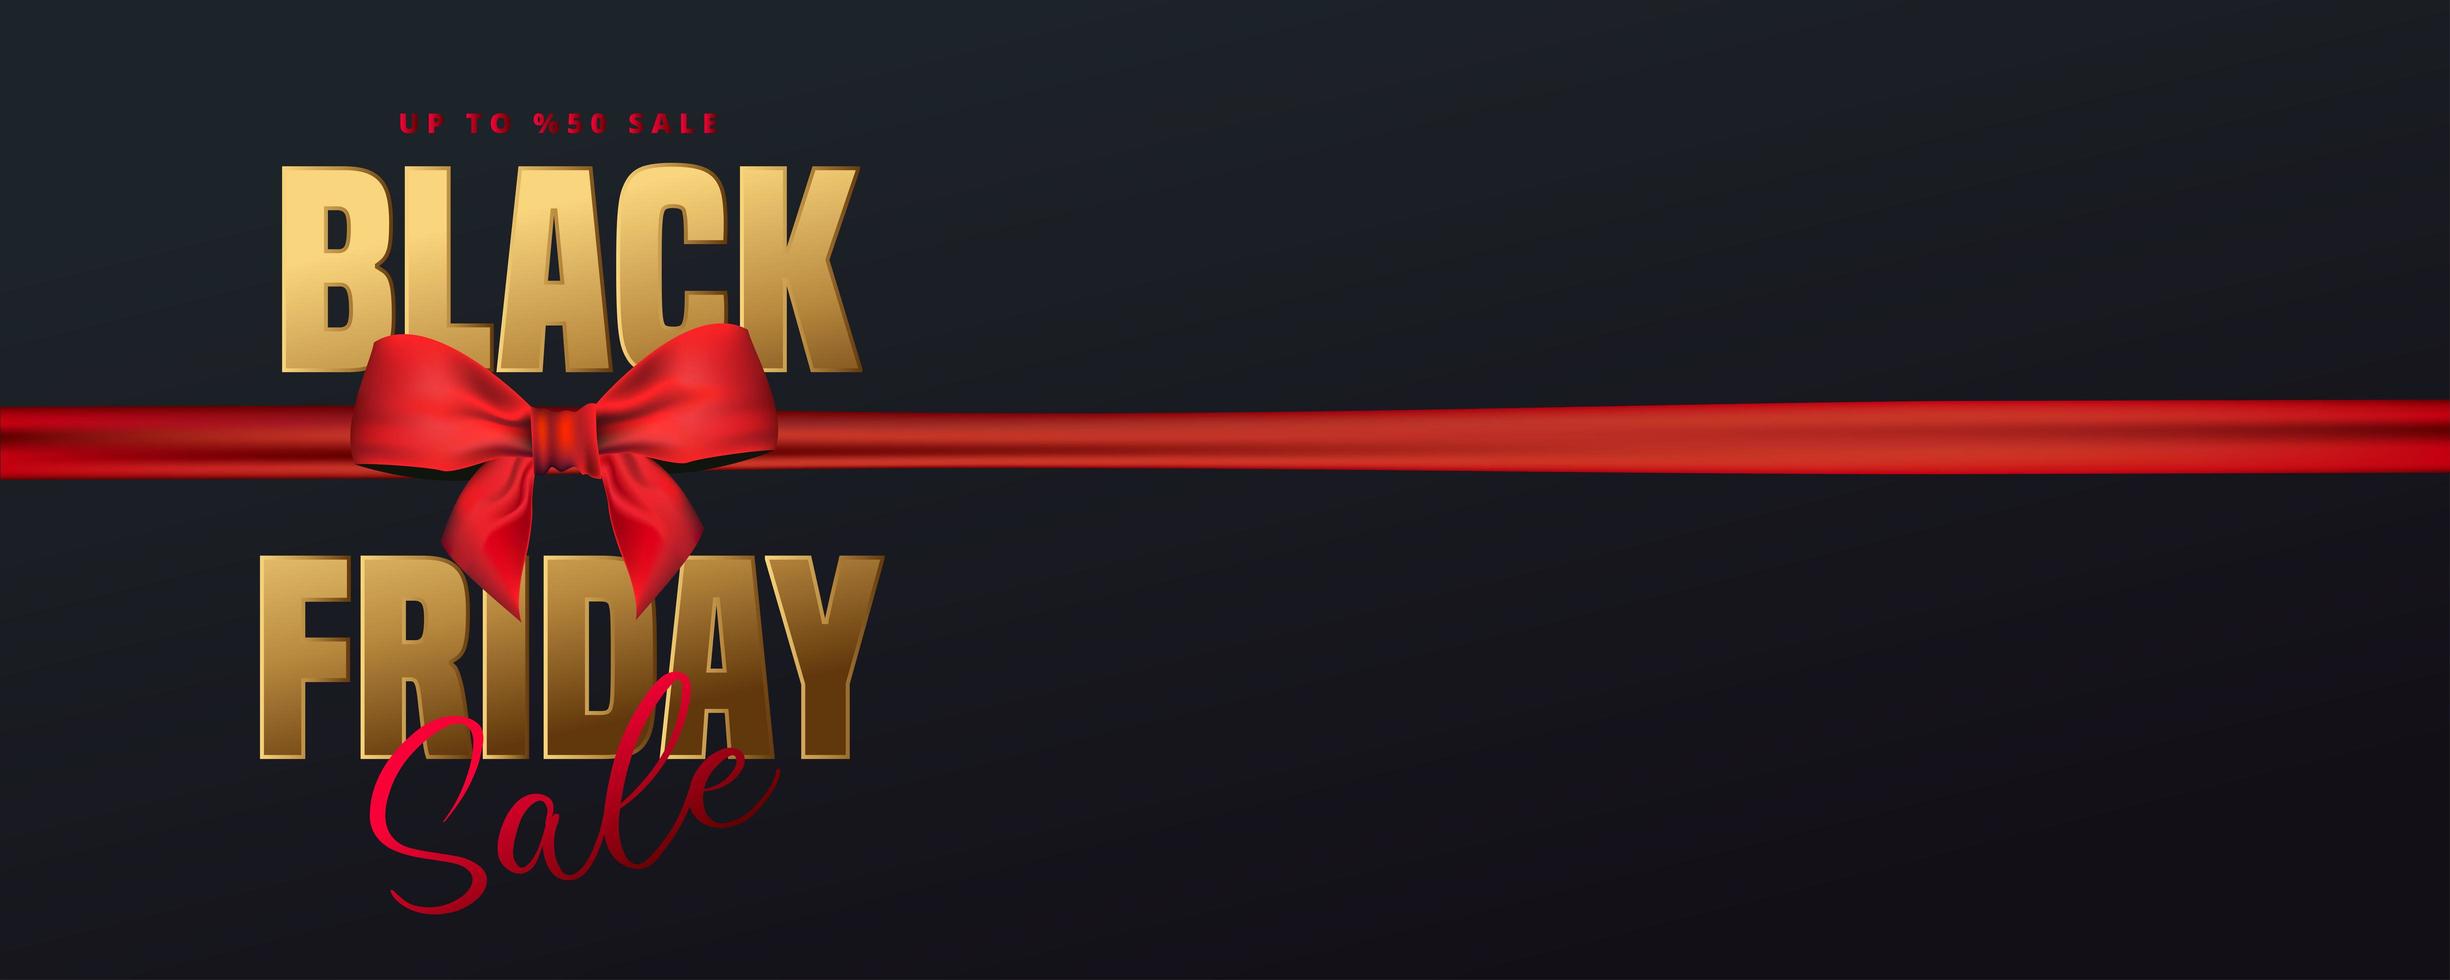 Black friday sale banner with gold text and red ribbon vector